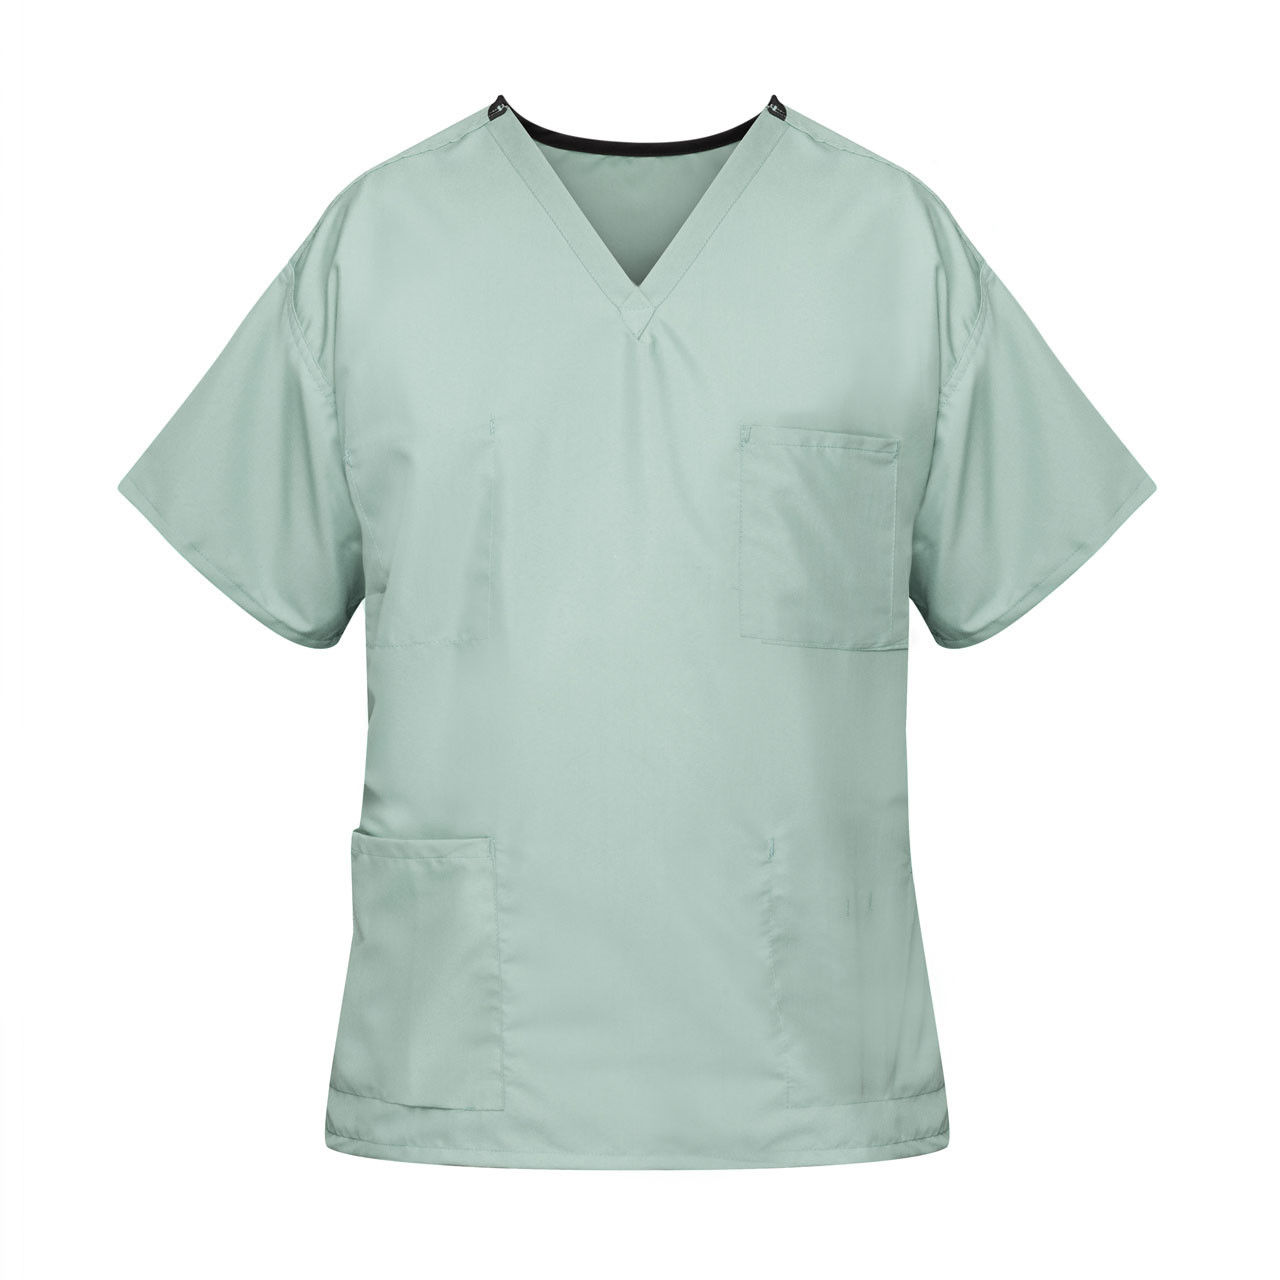 What weave is used for these misty green scrubs?